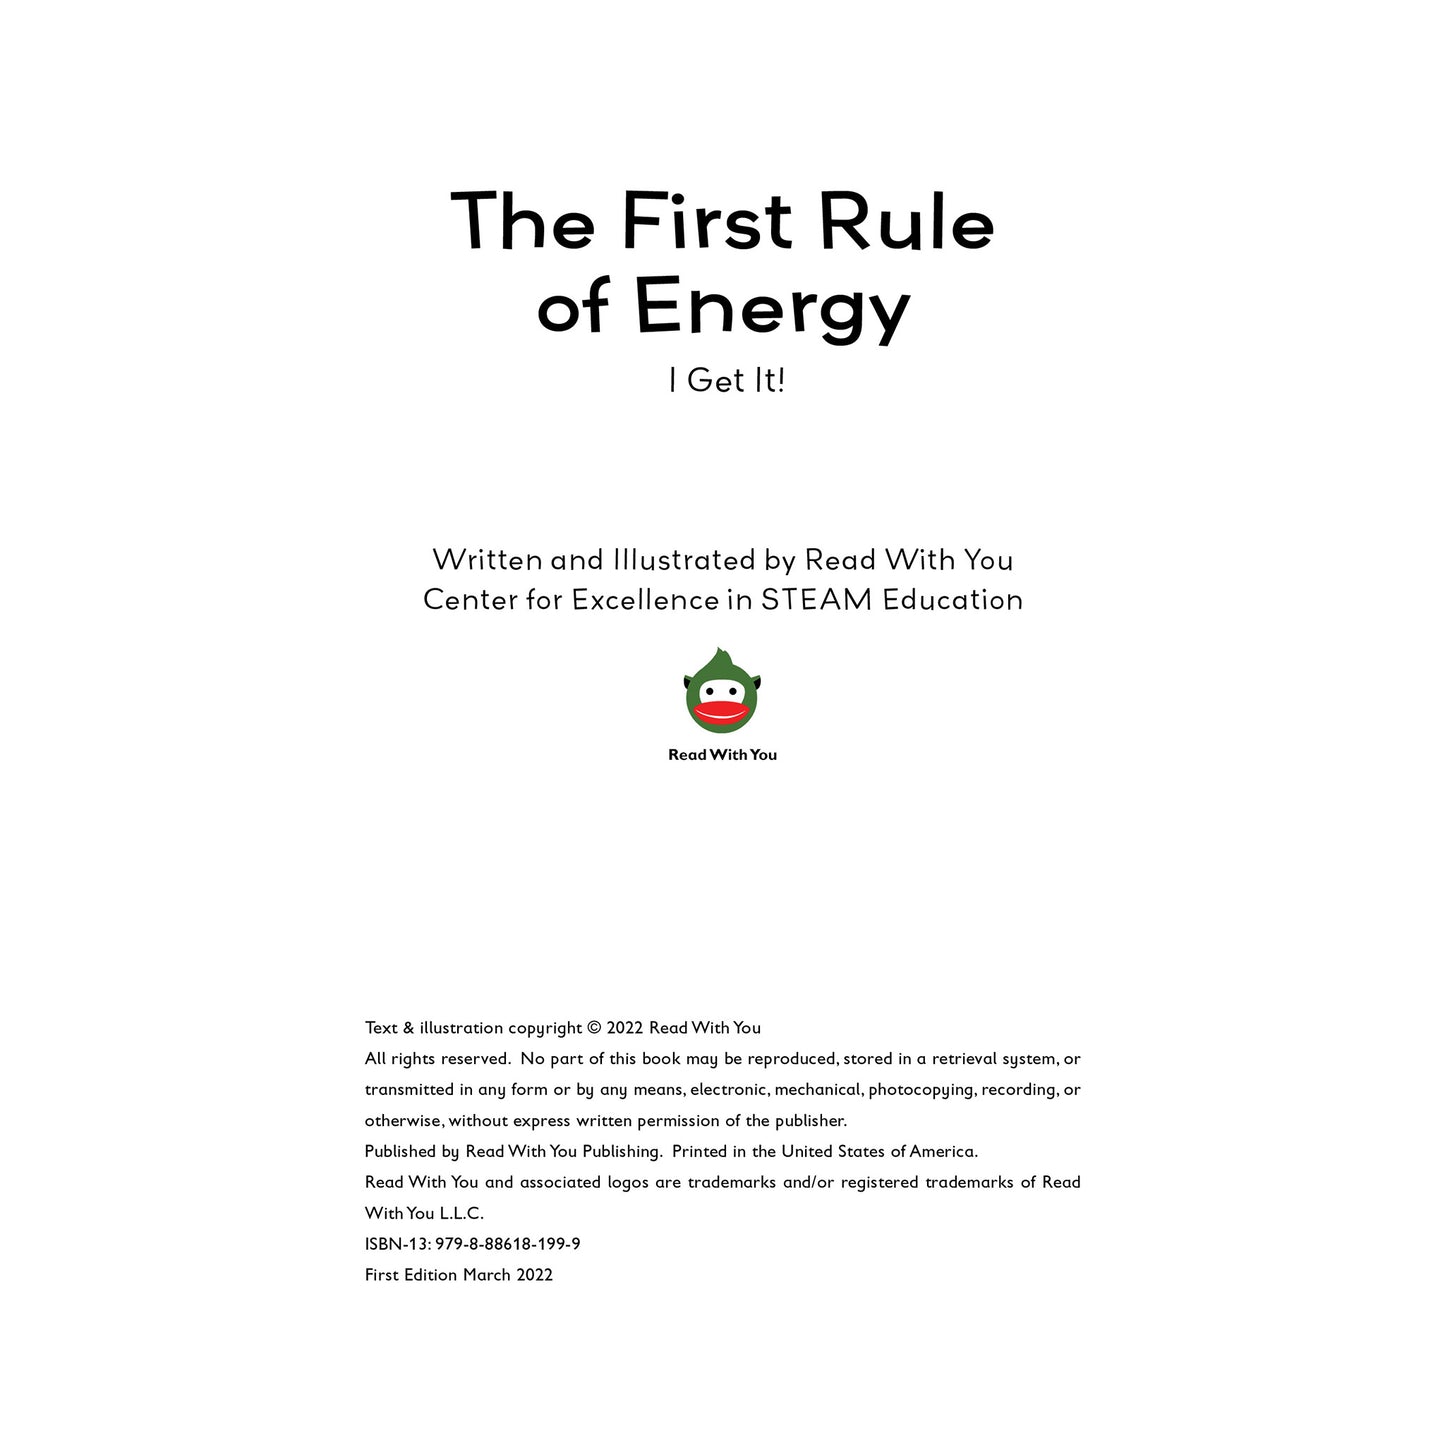 The First Rule of Energy